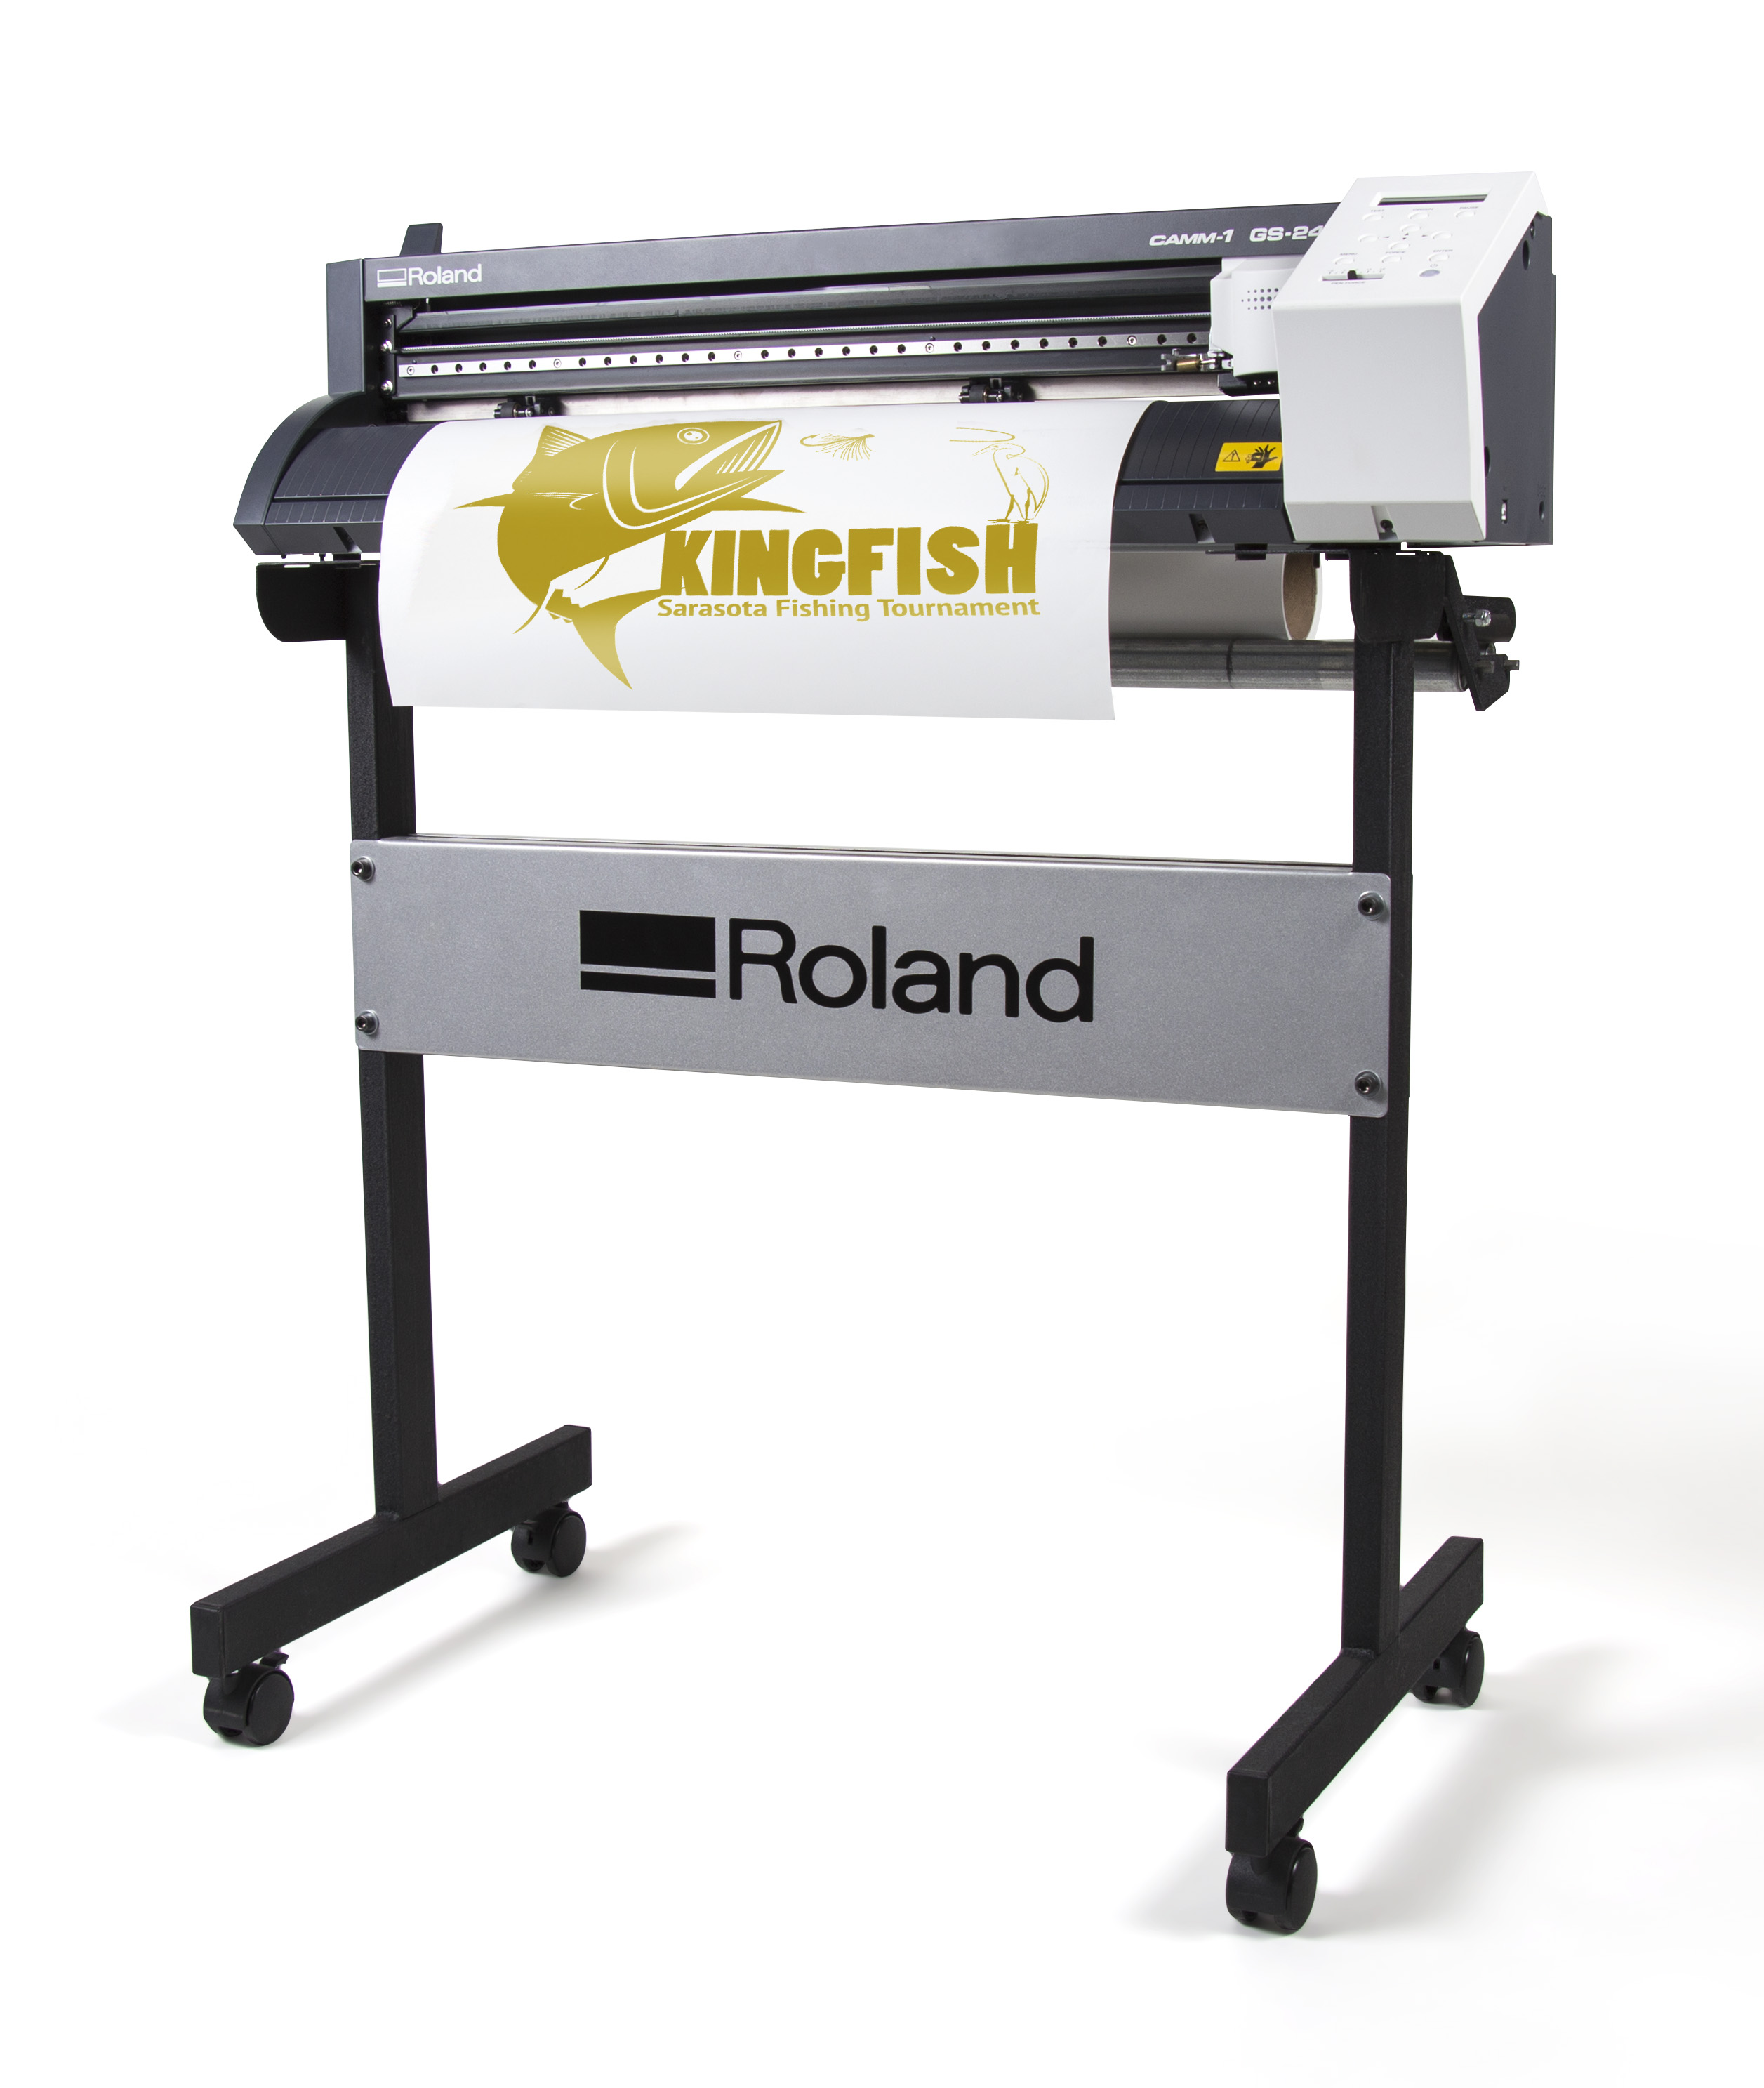 CAMM-1 GS-24 Vinyl Cutter with included stand